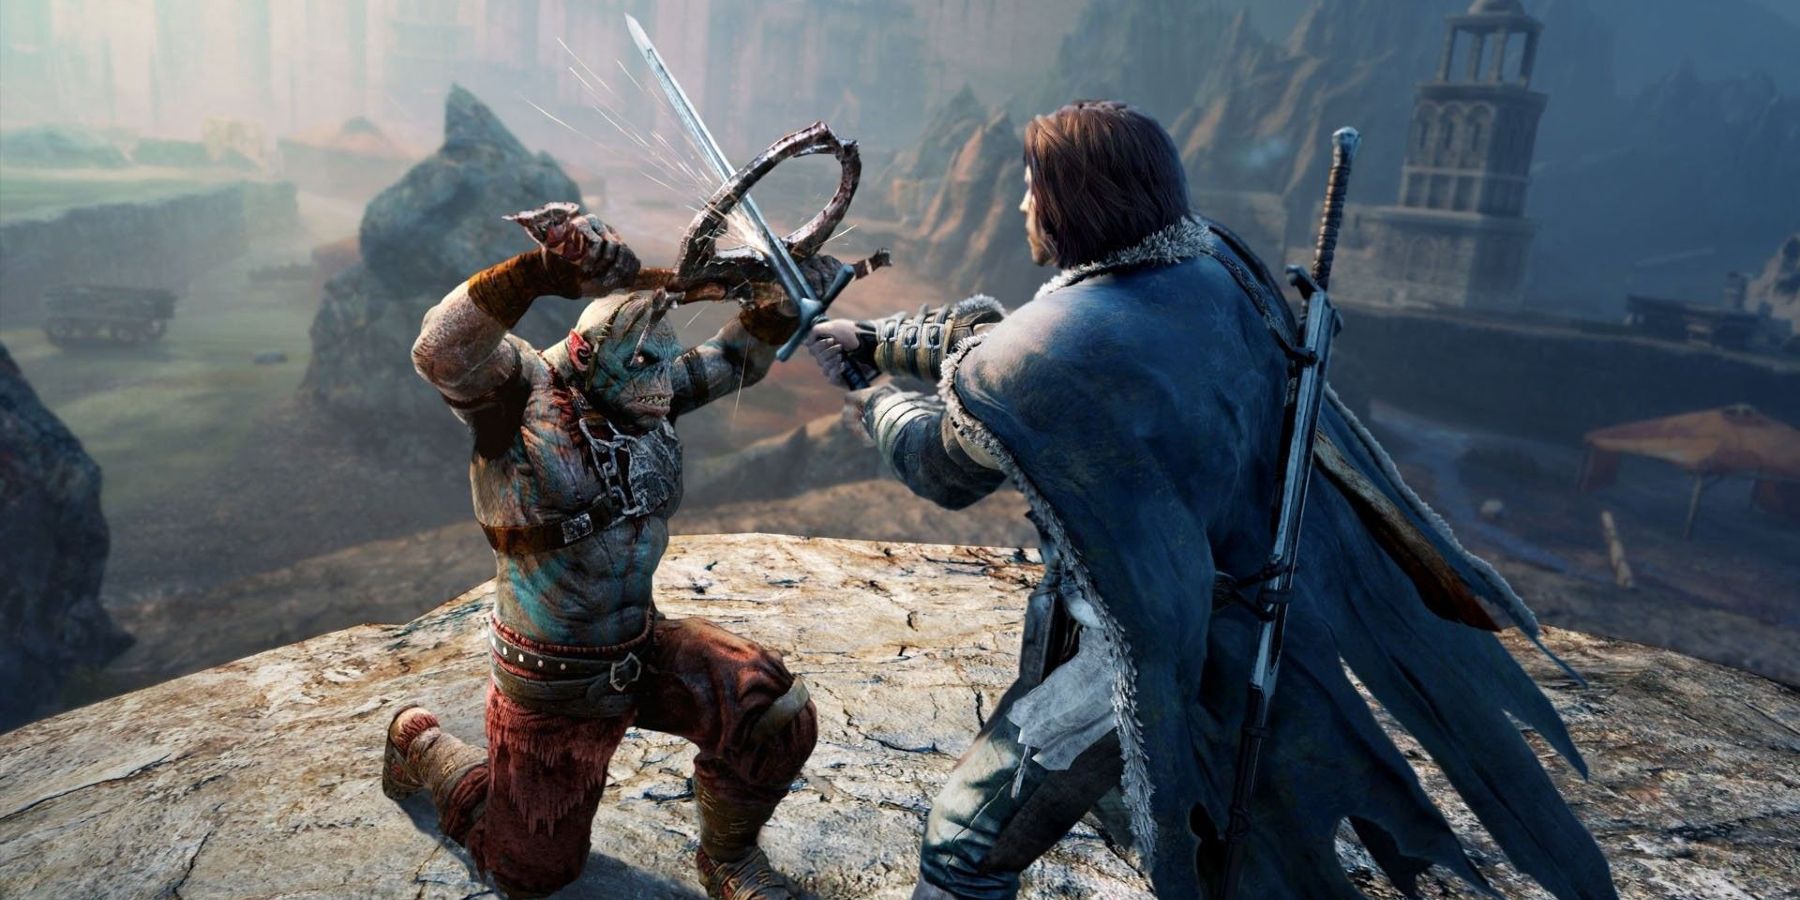 shadow of mordor talion fighting an orc